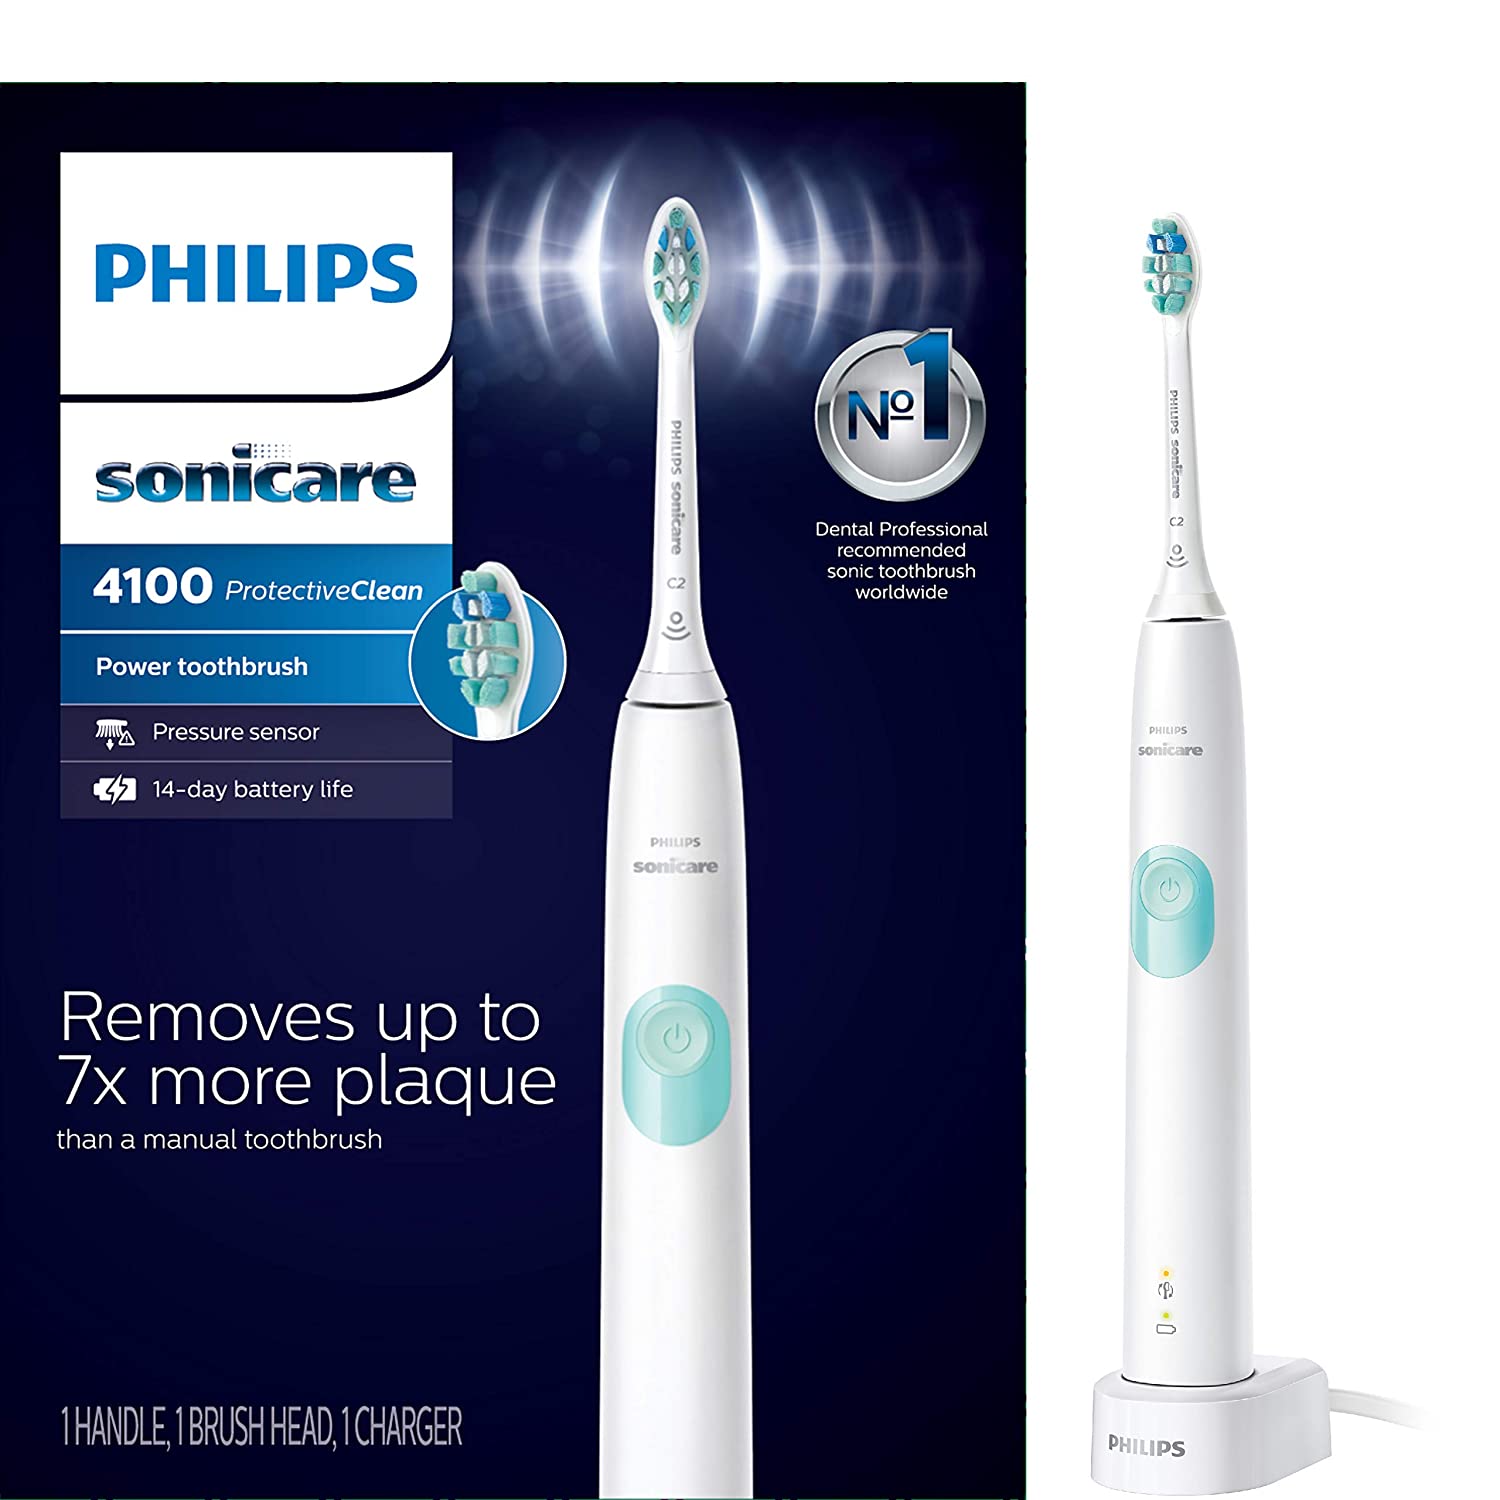 Philips Sonicare HX6817/01 ProtectiveClean 4100 Rechargeable Electric Toothbrush, White - Pro-Distributing